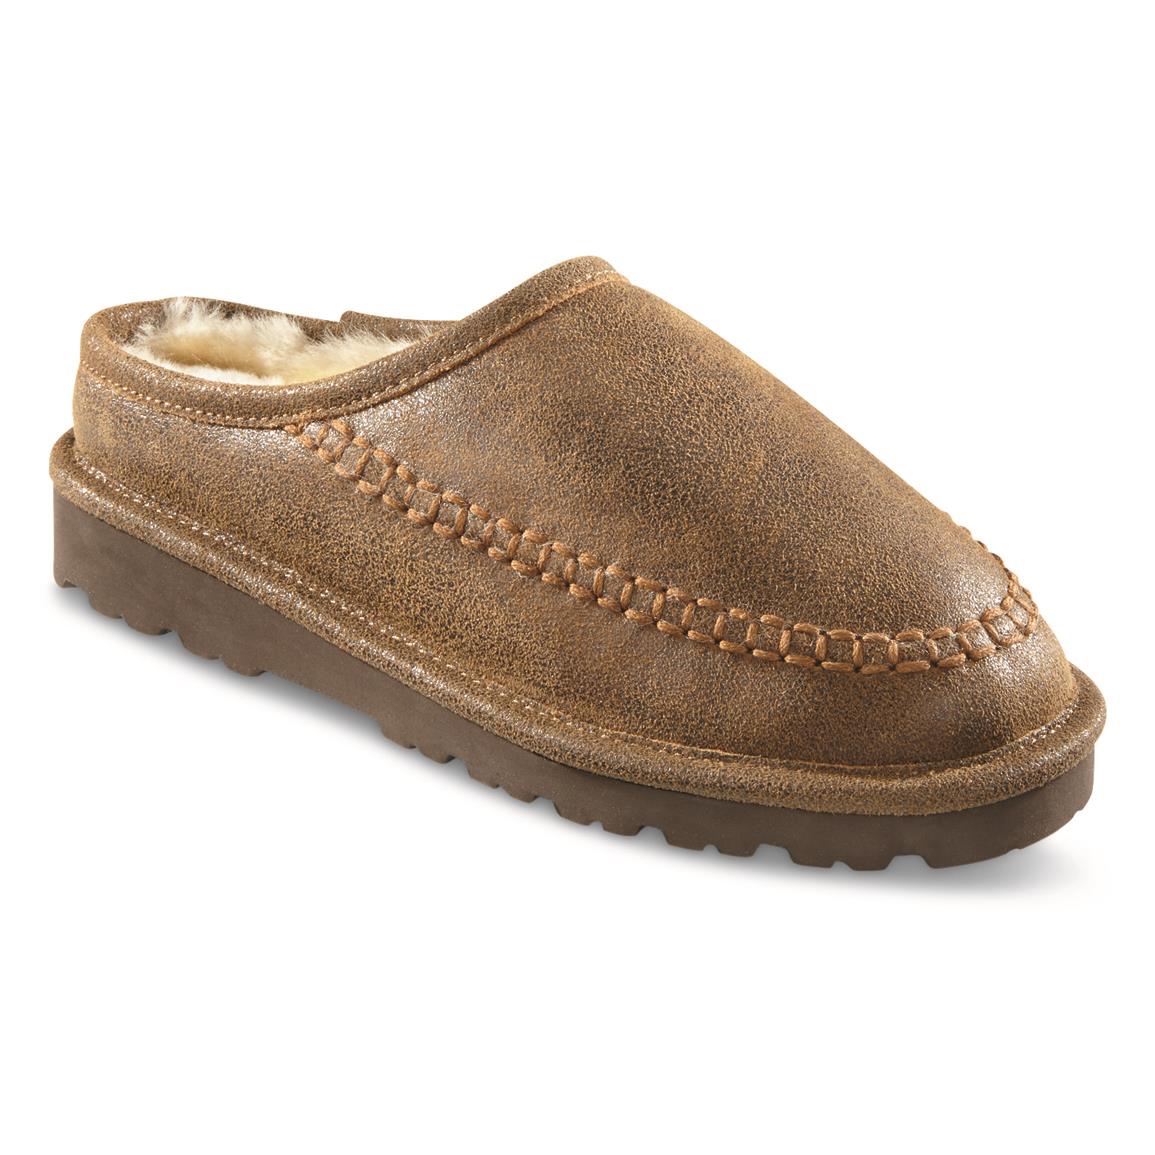 Guide Gear Men's Double-face Shearling Clog Slippers, Brown Bomber